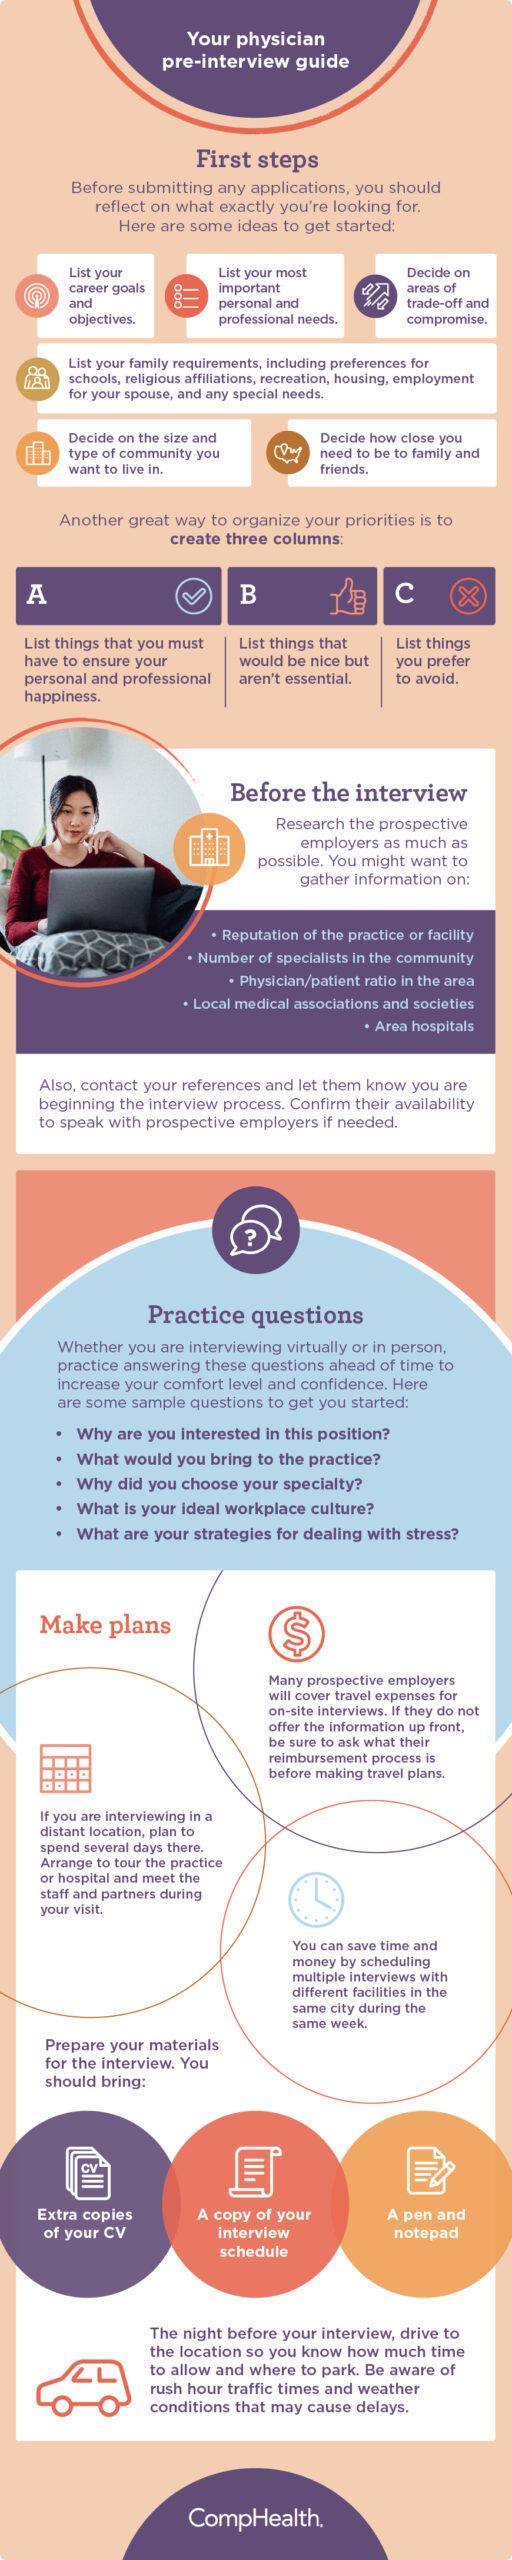 Learn how to prepare for a physician interview with this guide.